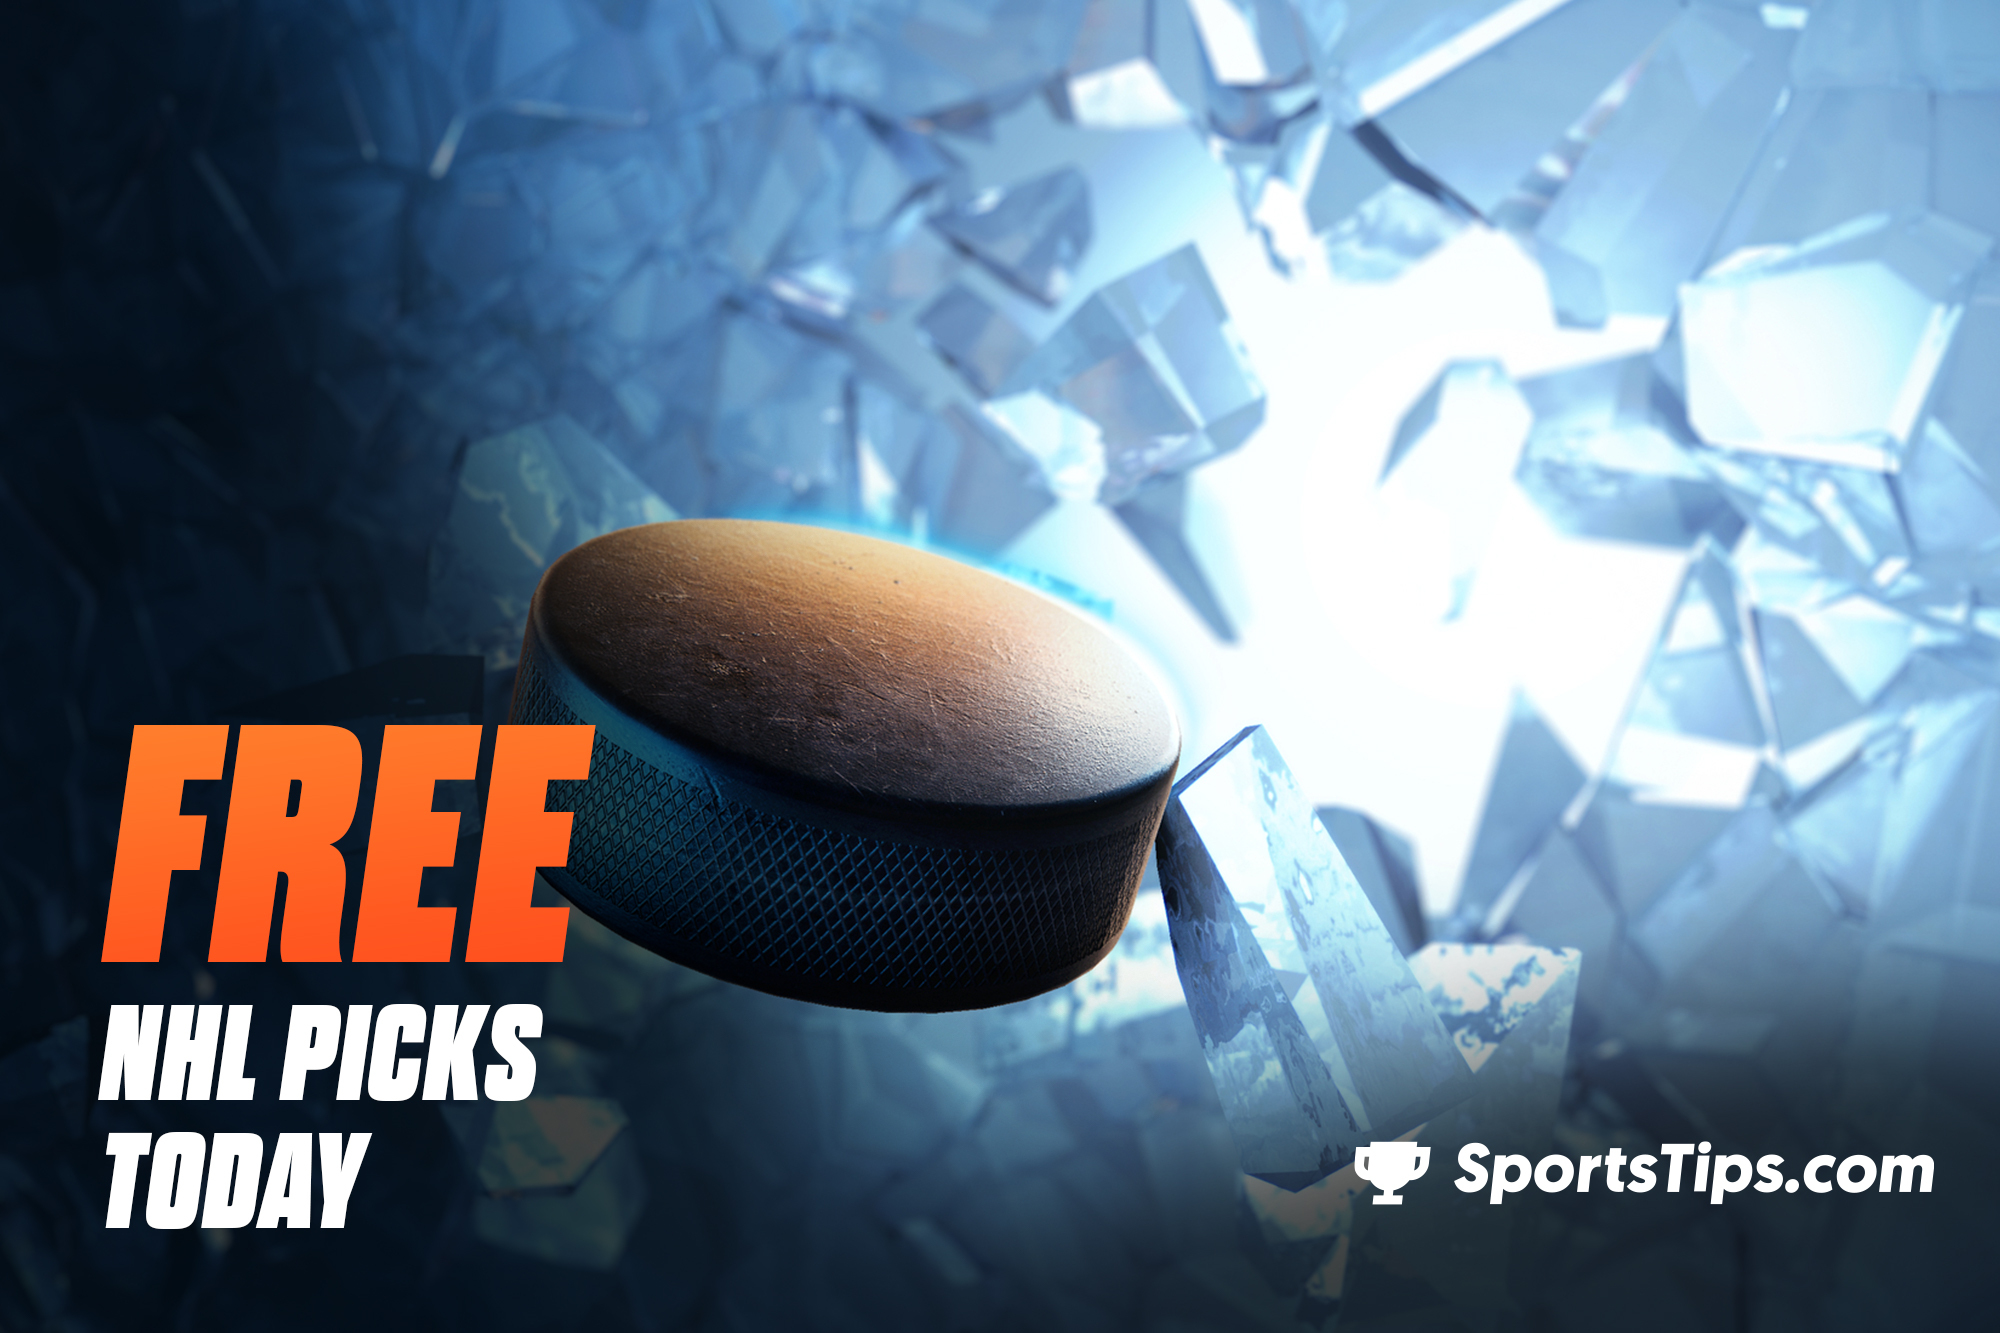 Free NHL Picks Today for Monday, February 22nd, 2021